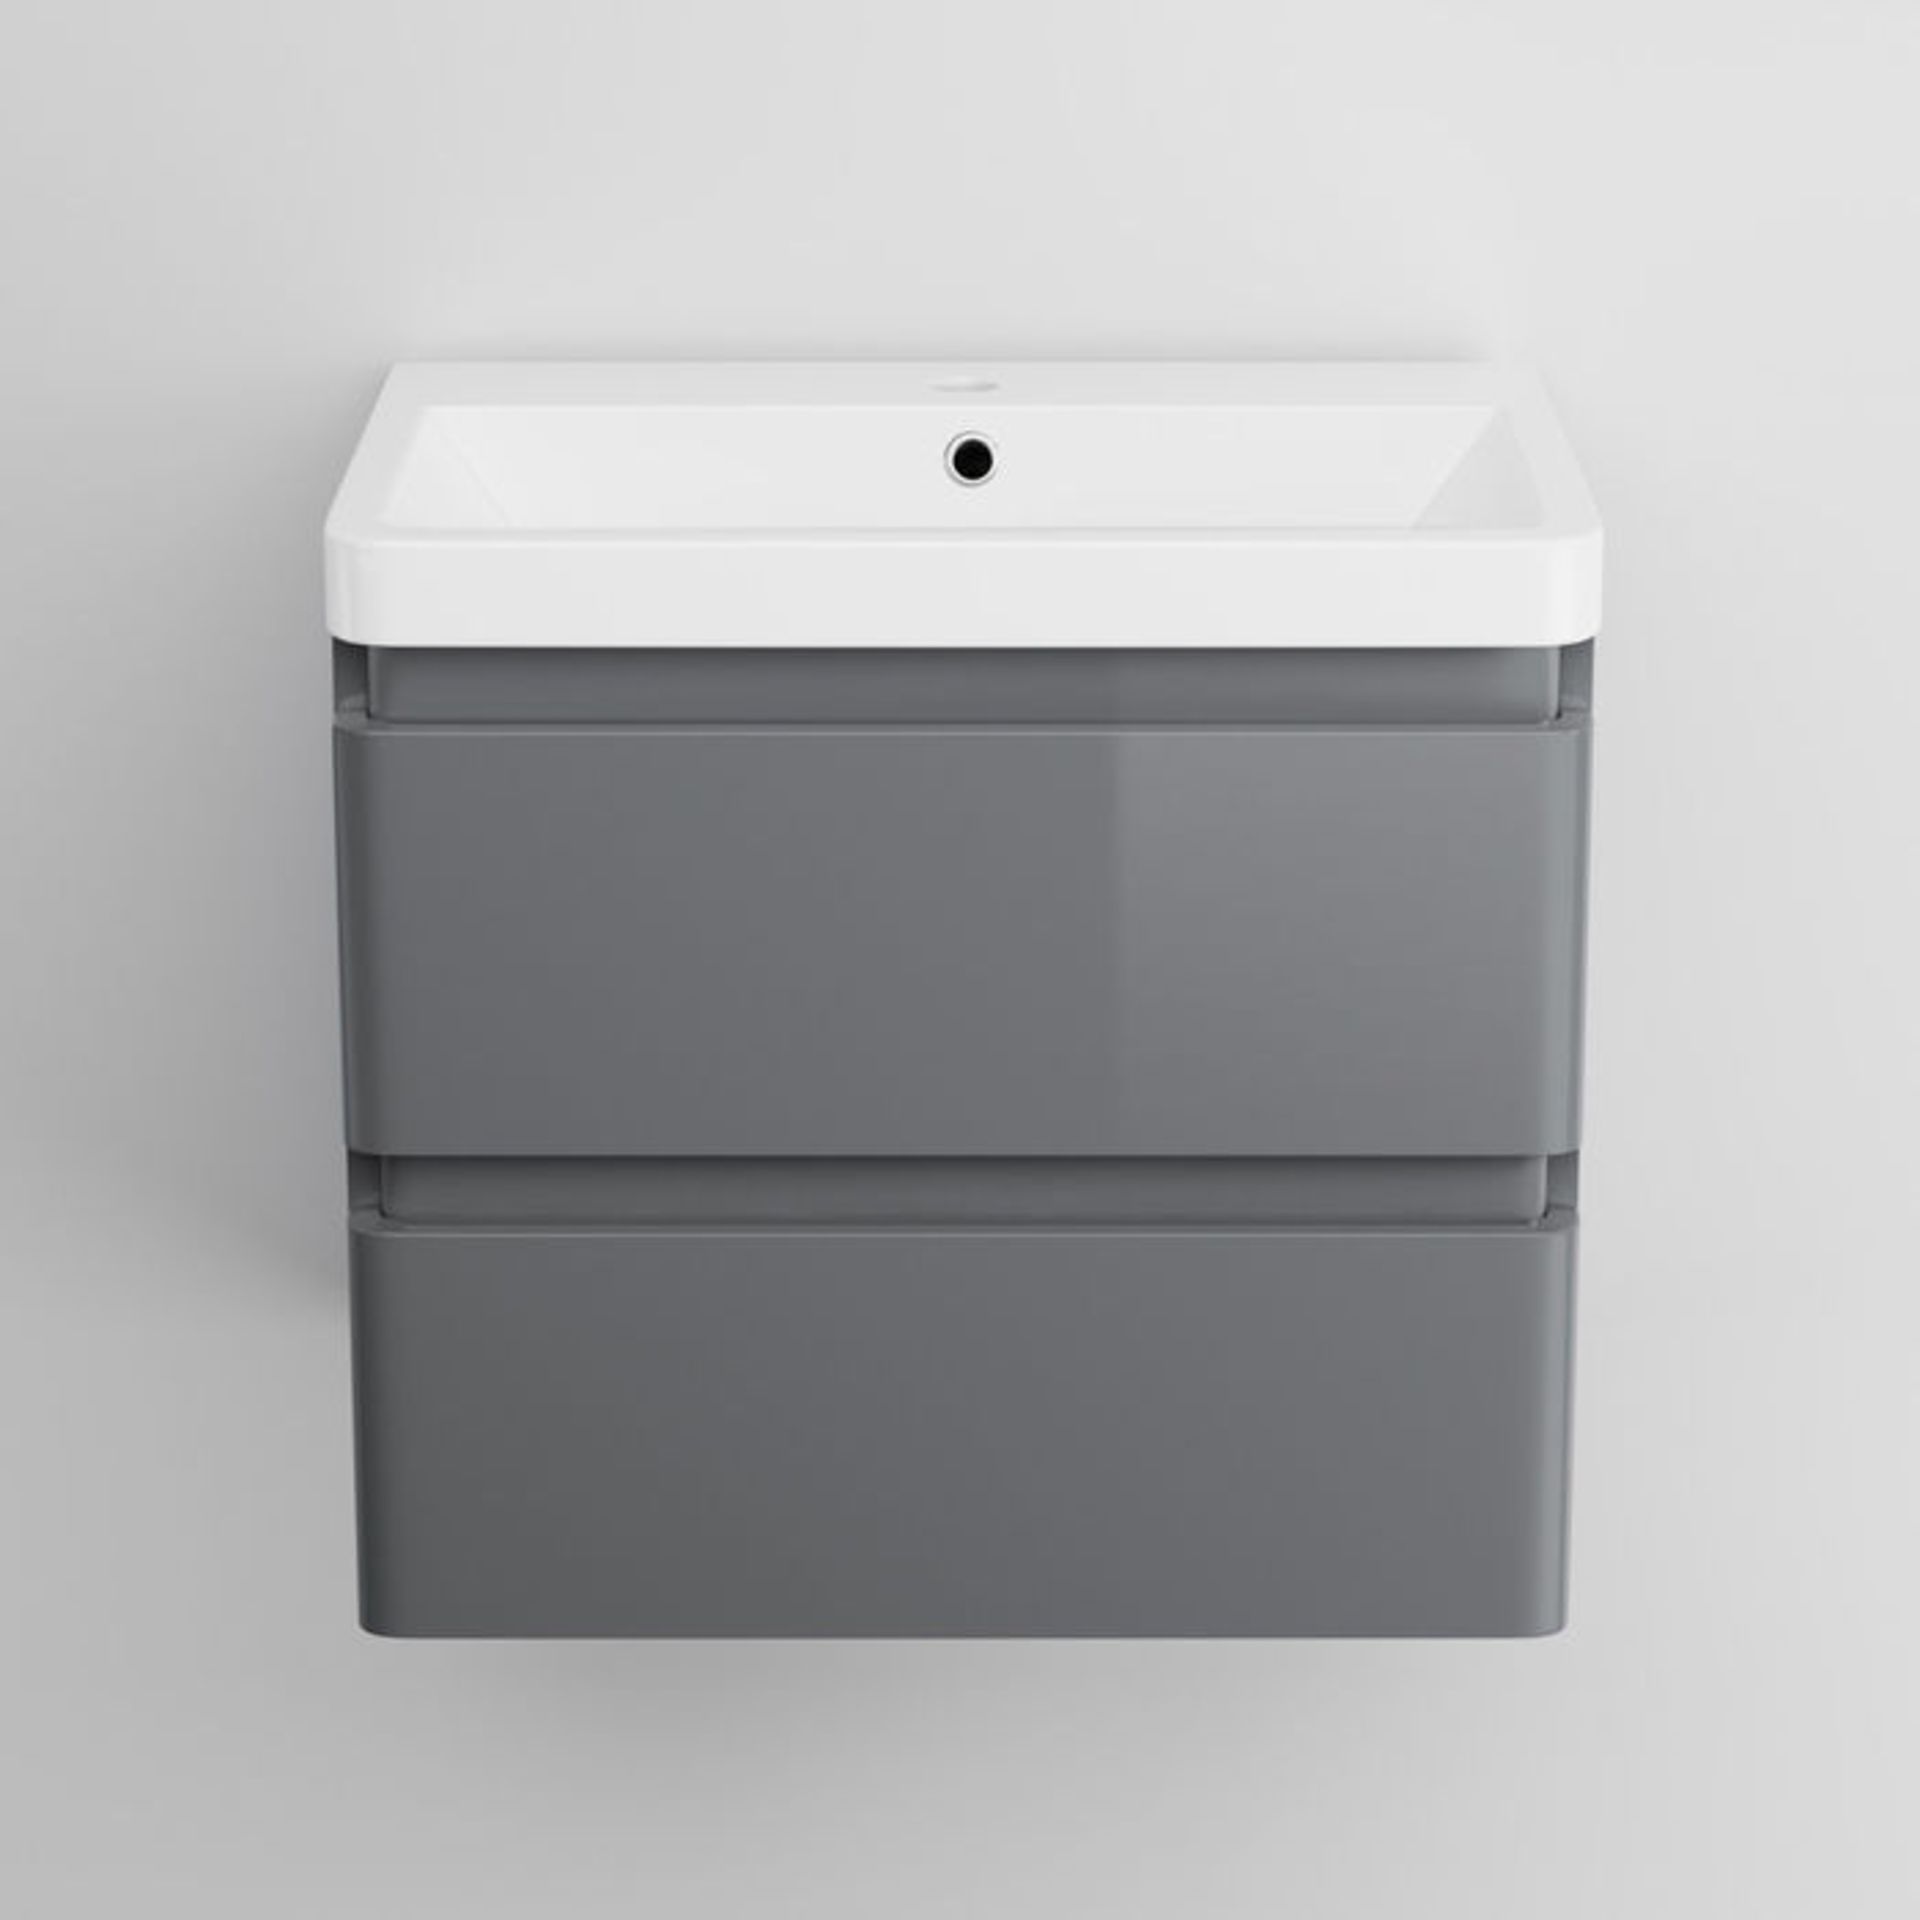 (CT51) 600mm Denver Gloss Grey Built In Basin Drawer Unit - Wall Hung. RRP £254.99. Comes complete - Image 4 of 4